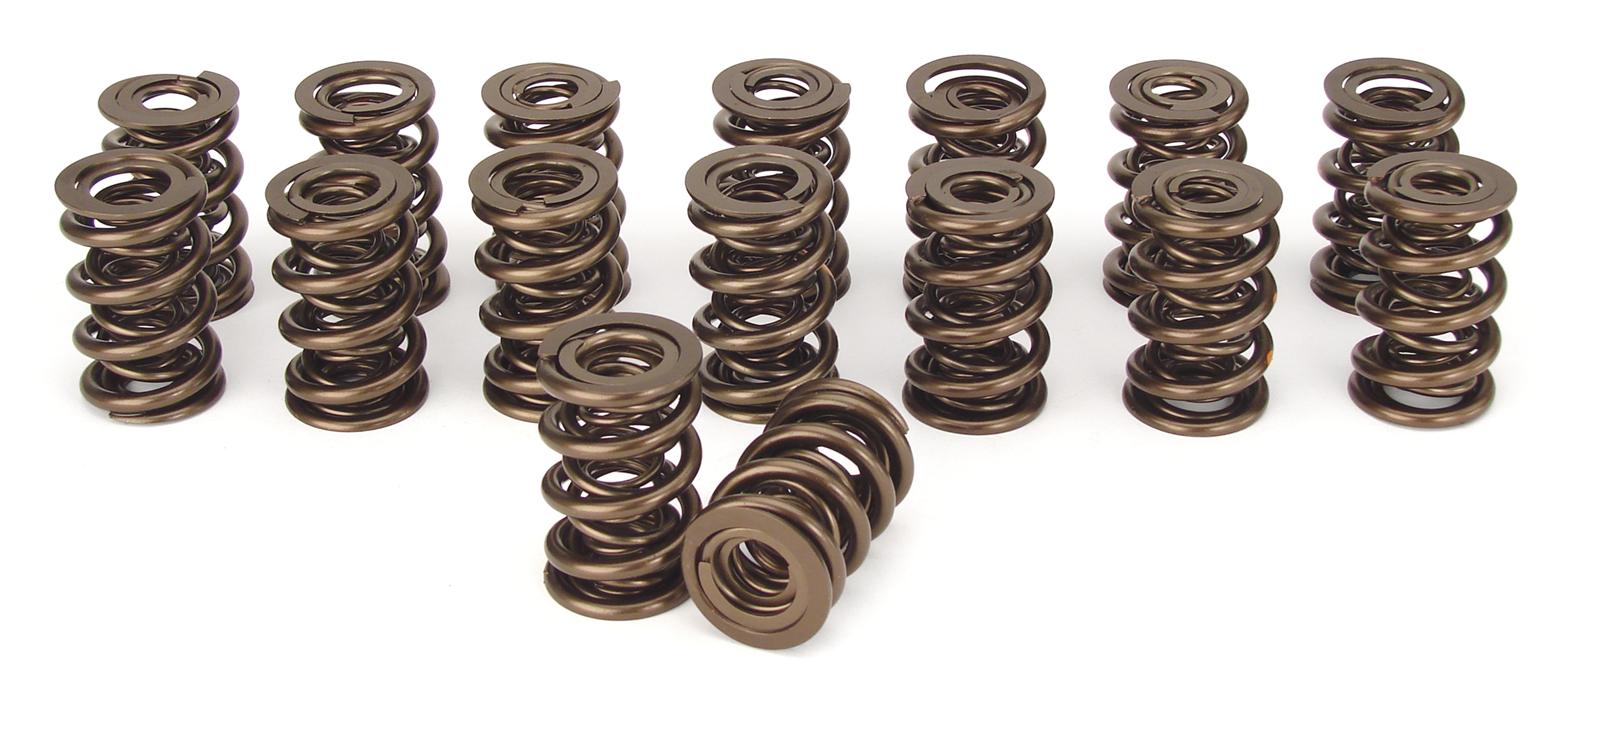 COMP Cams 948-16 COMP Cams Valve Springs Summit Racing